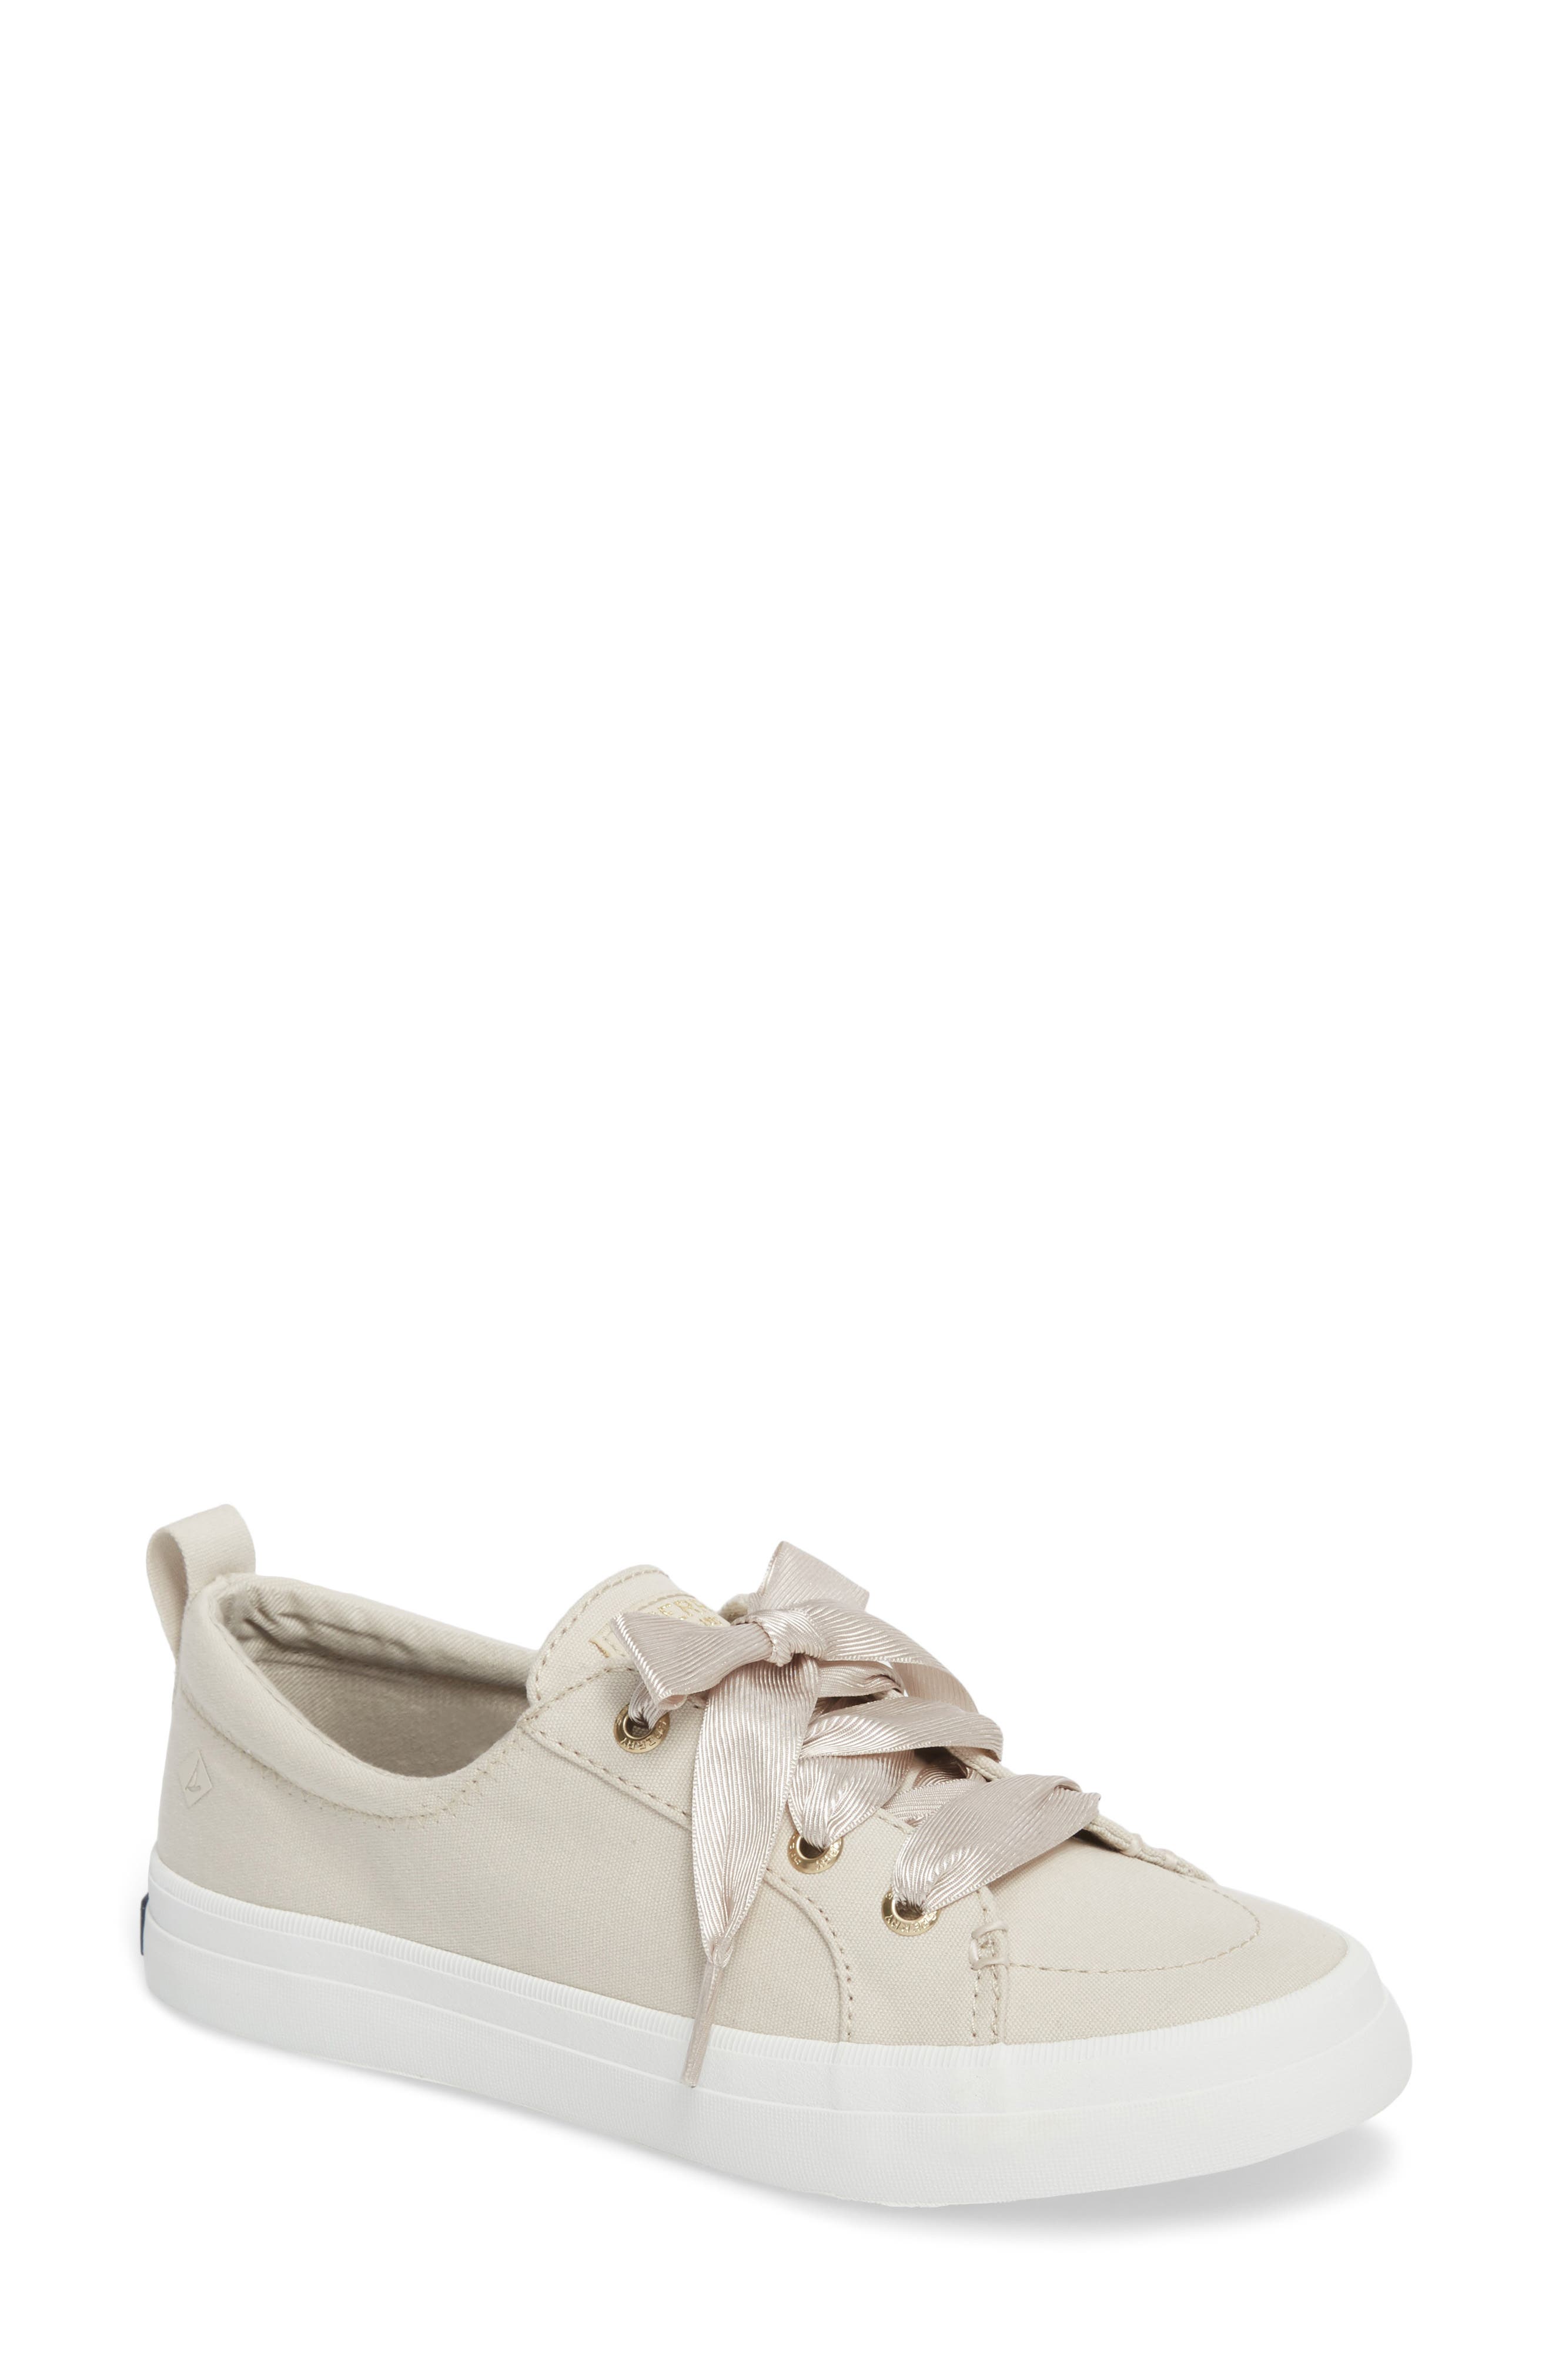 crest vibe satin lace sneaker